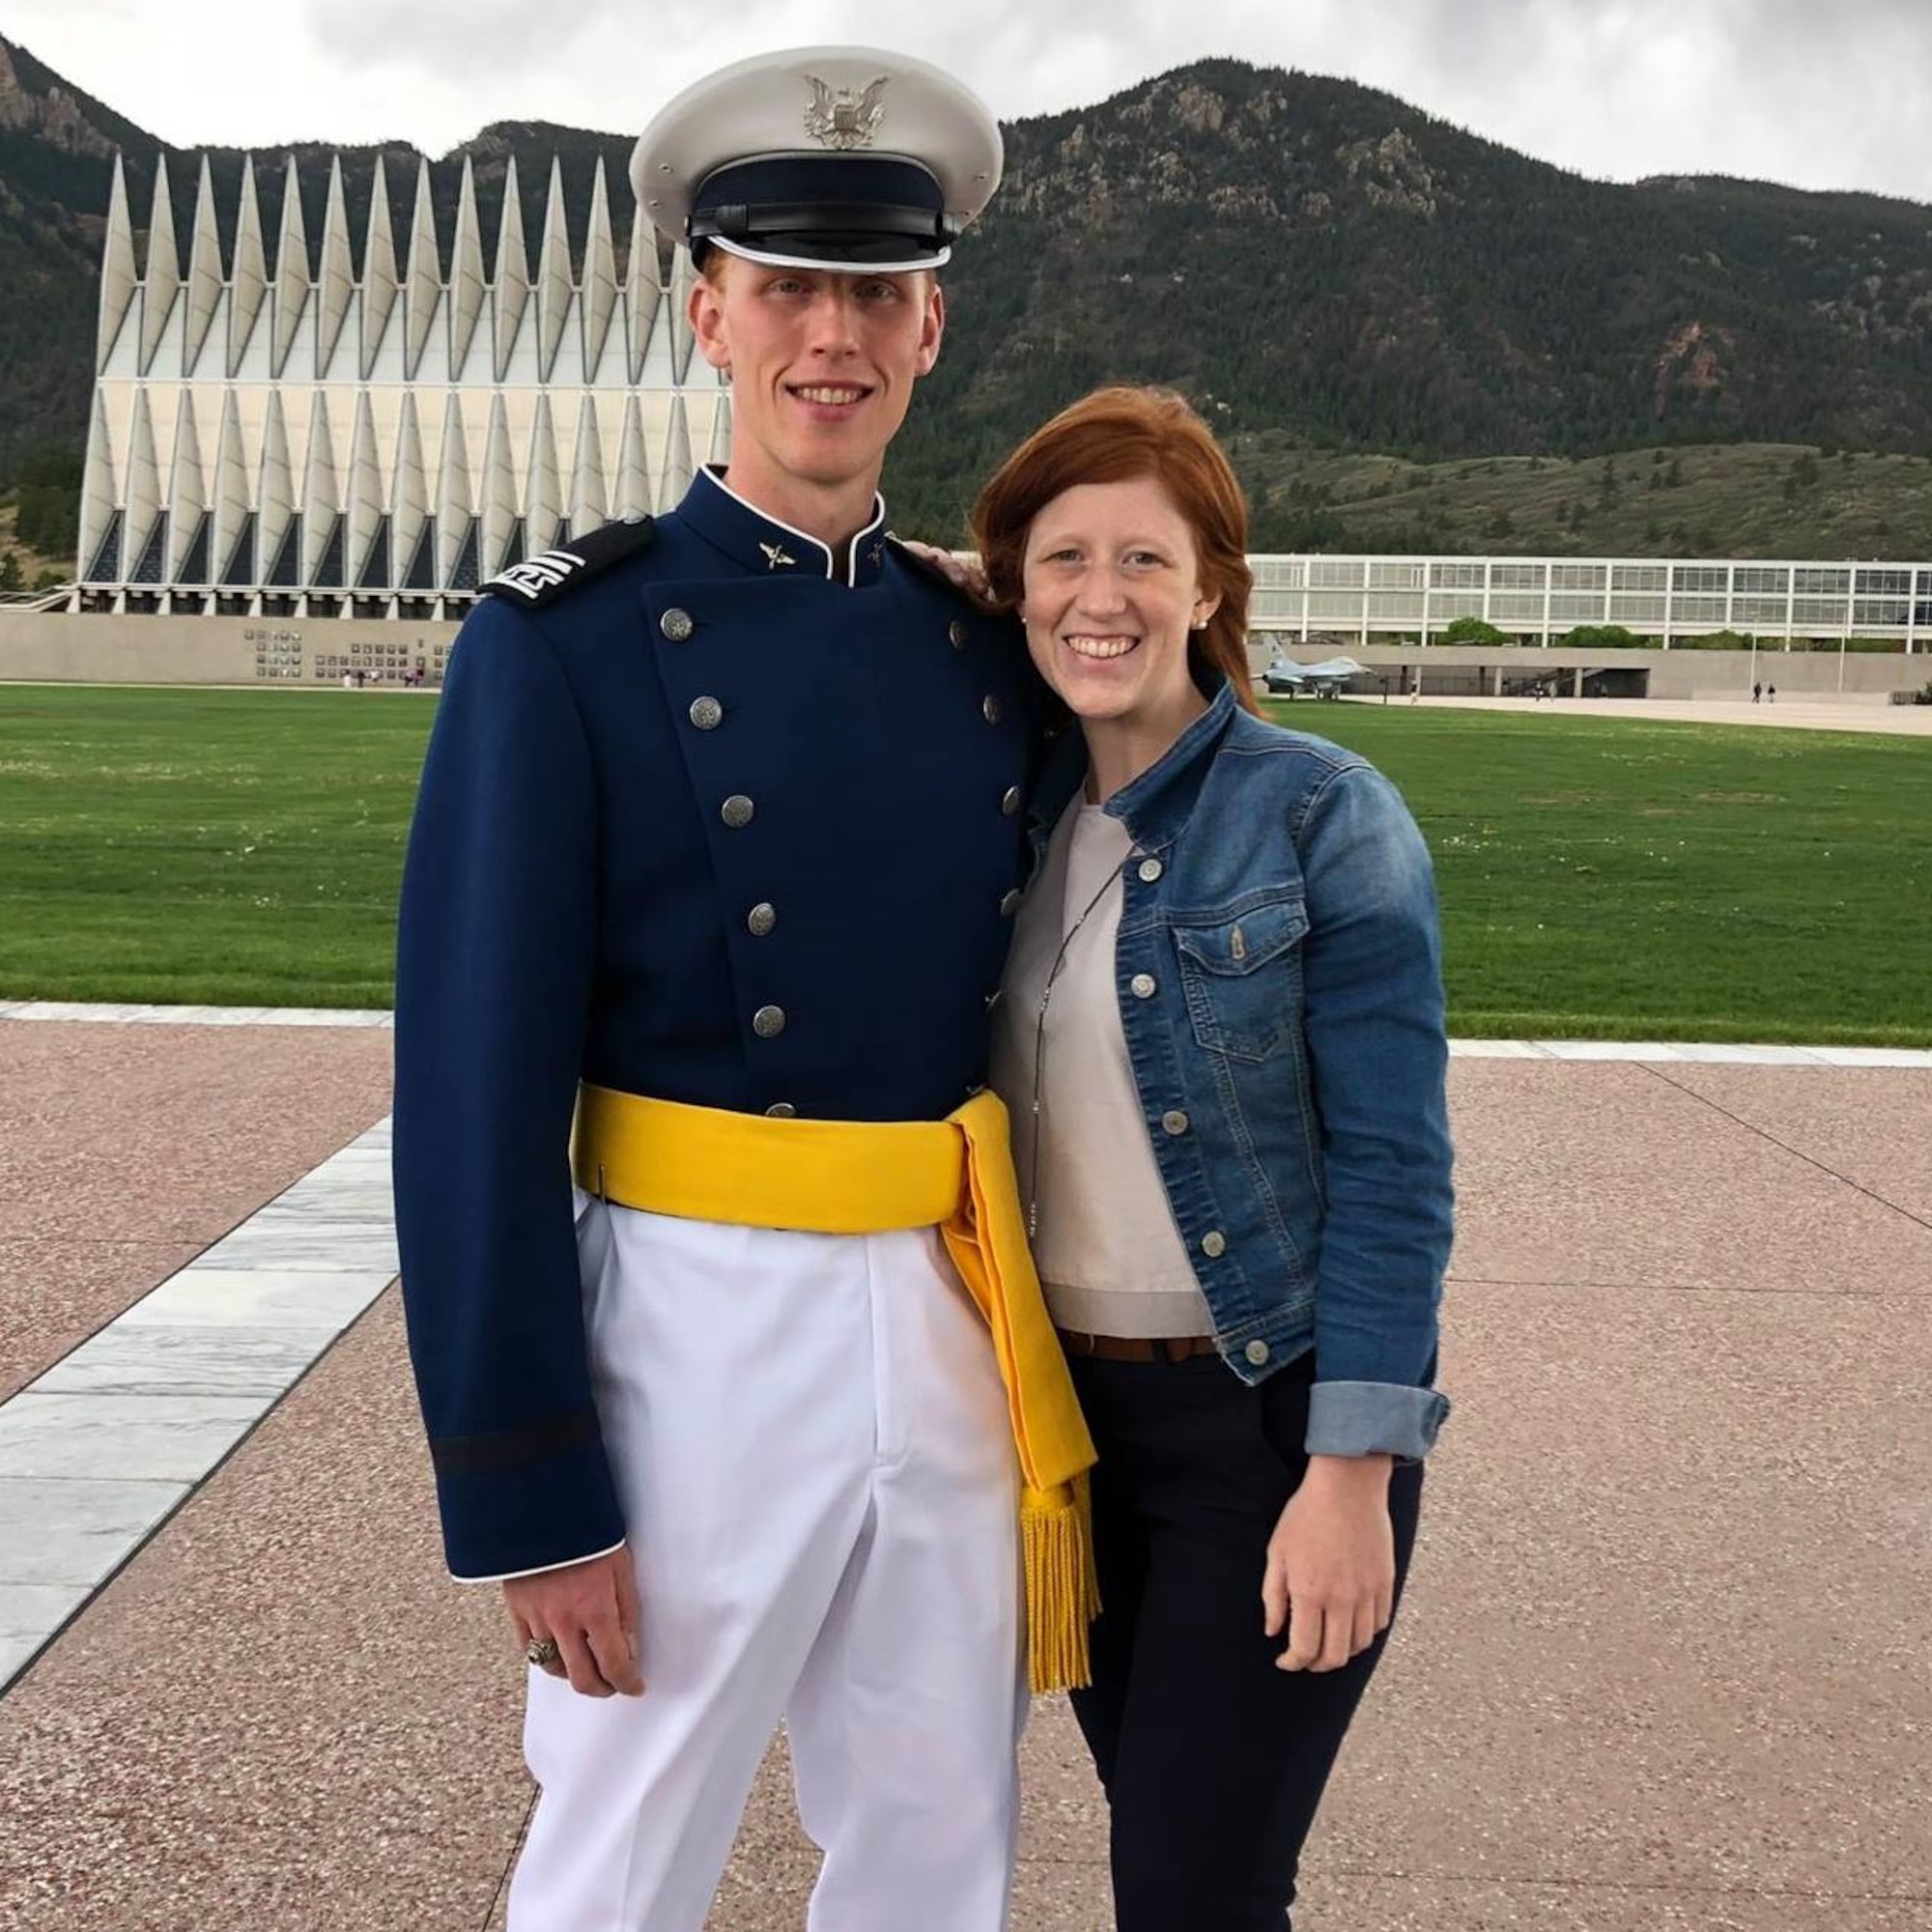 Second Lieutenant Austin Gadient graduated from the Air Force Academy in 2018. He is set to earn his graduate degree in electrical engineering and computer science from the Massachusetts Institute of Technology later this year. (Courtesy Photo)